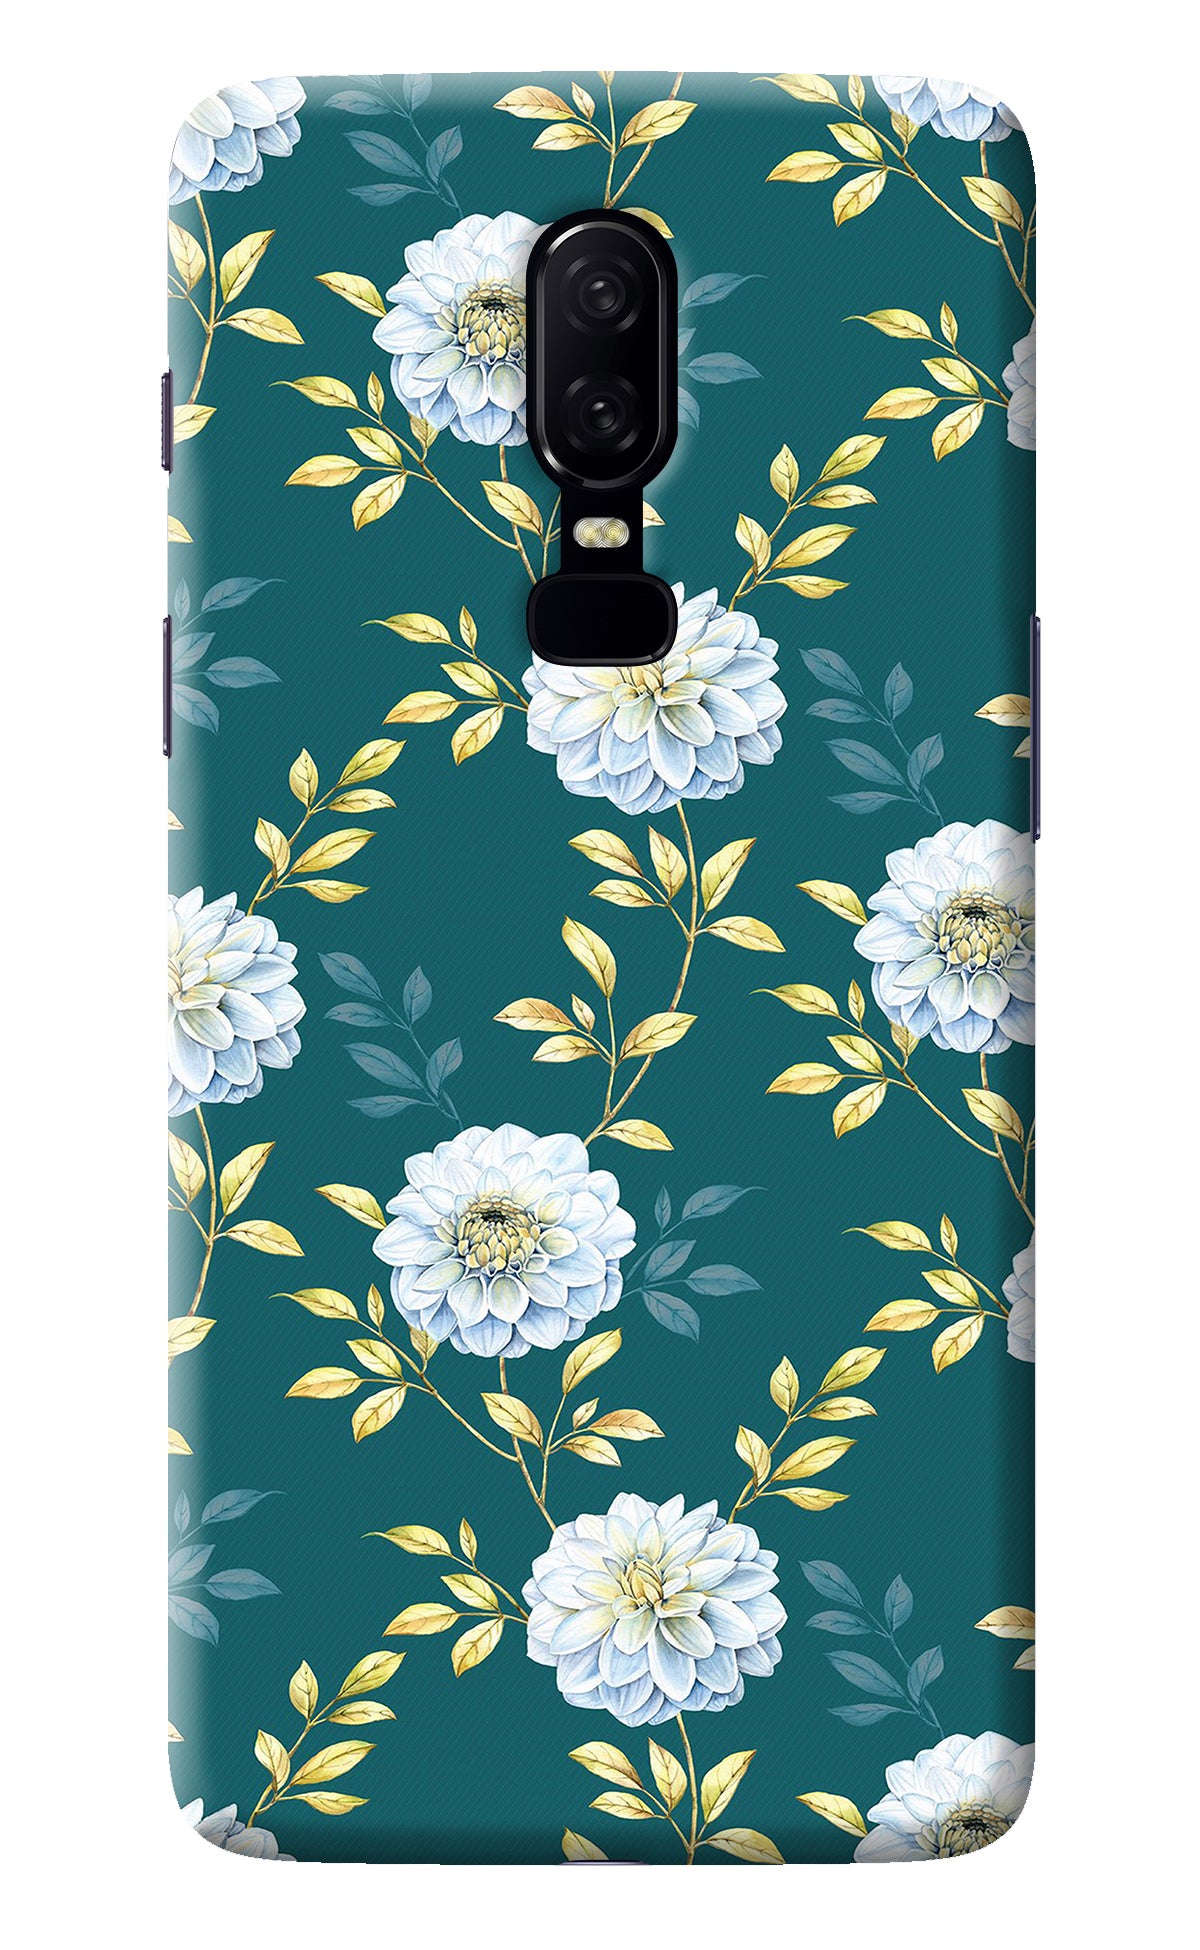 Flowers Oneplus 6 Back Cover